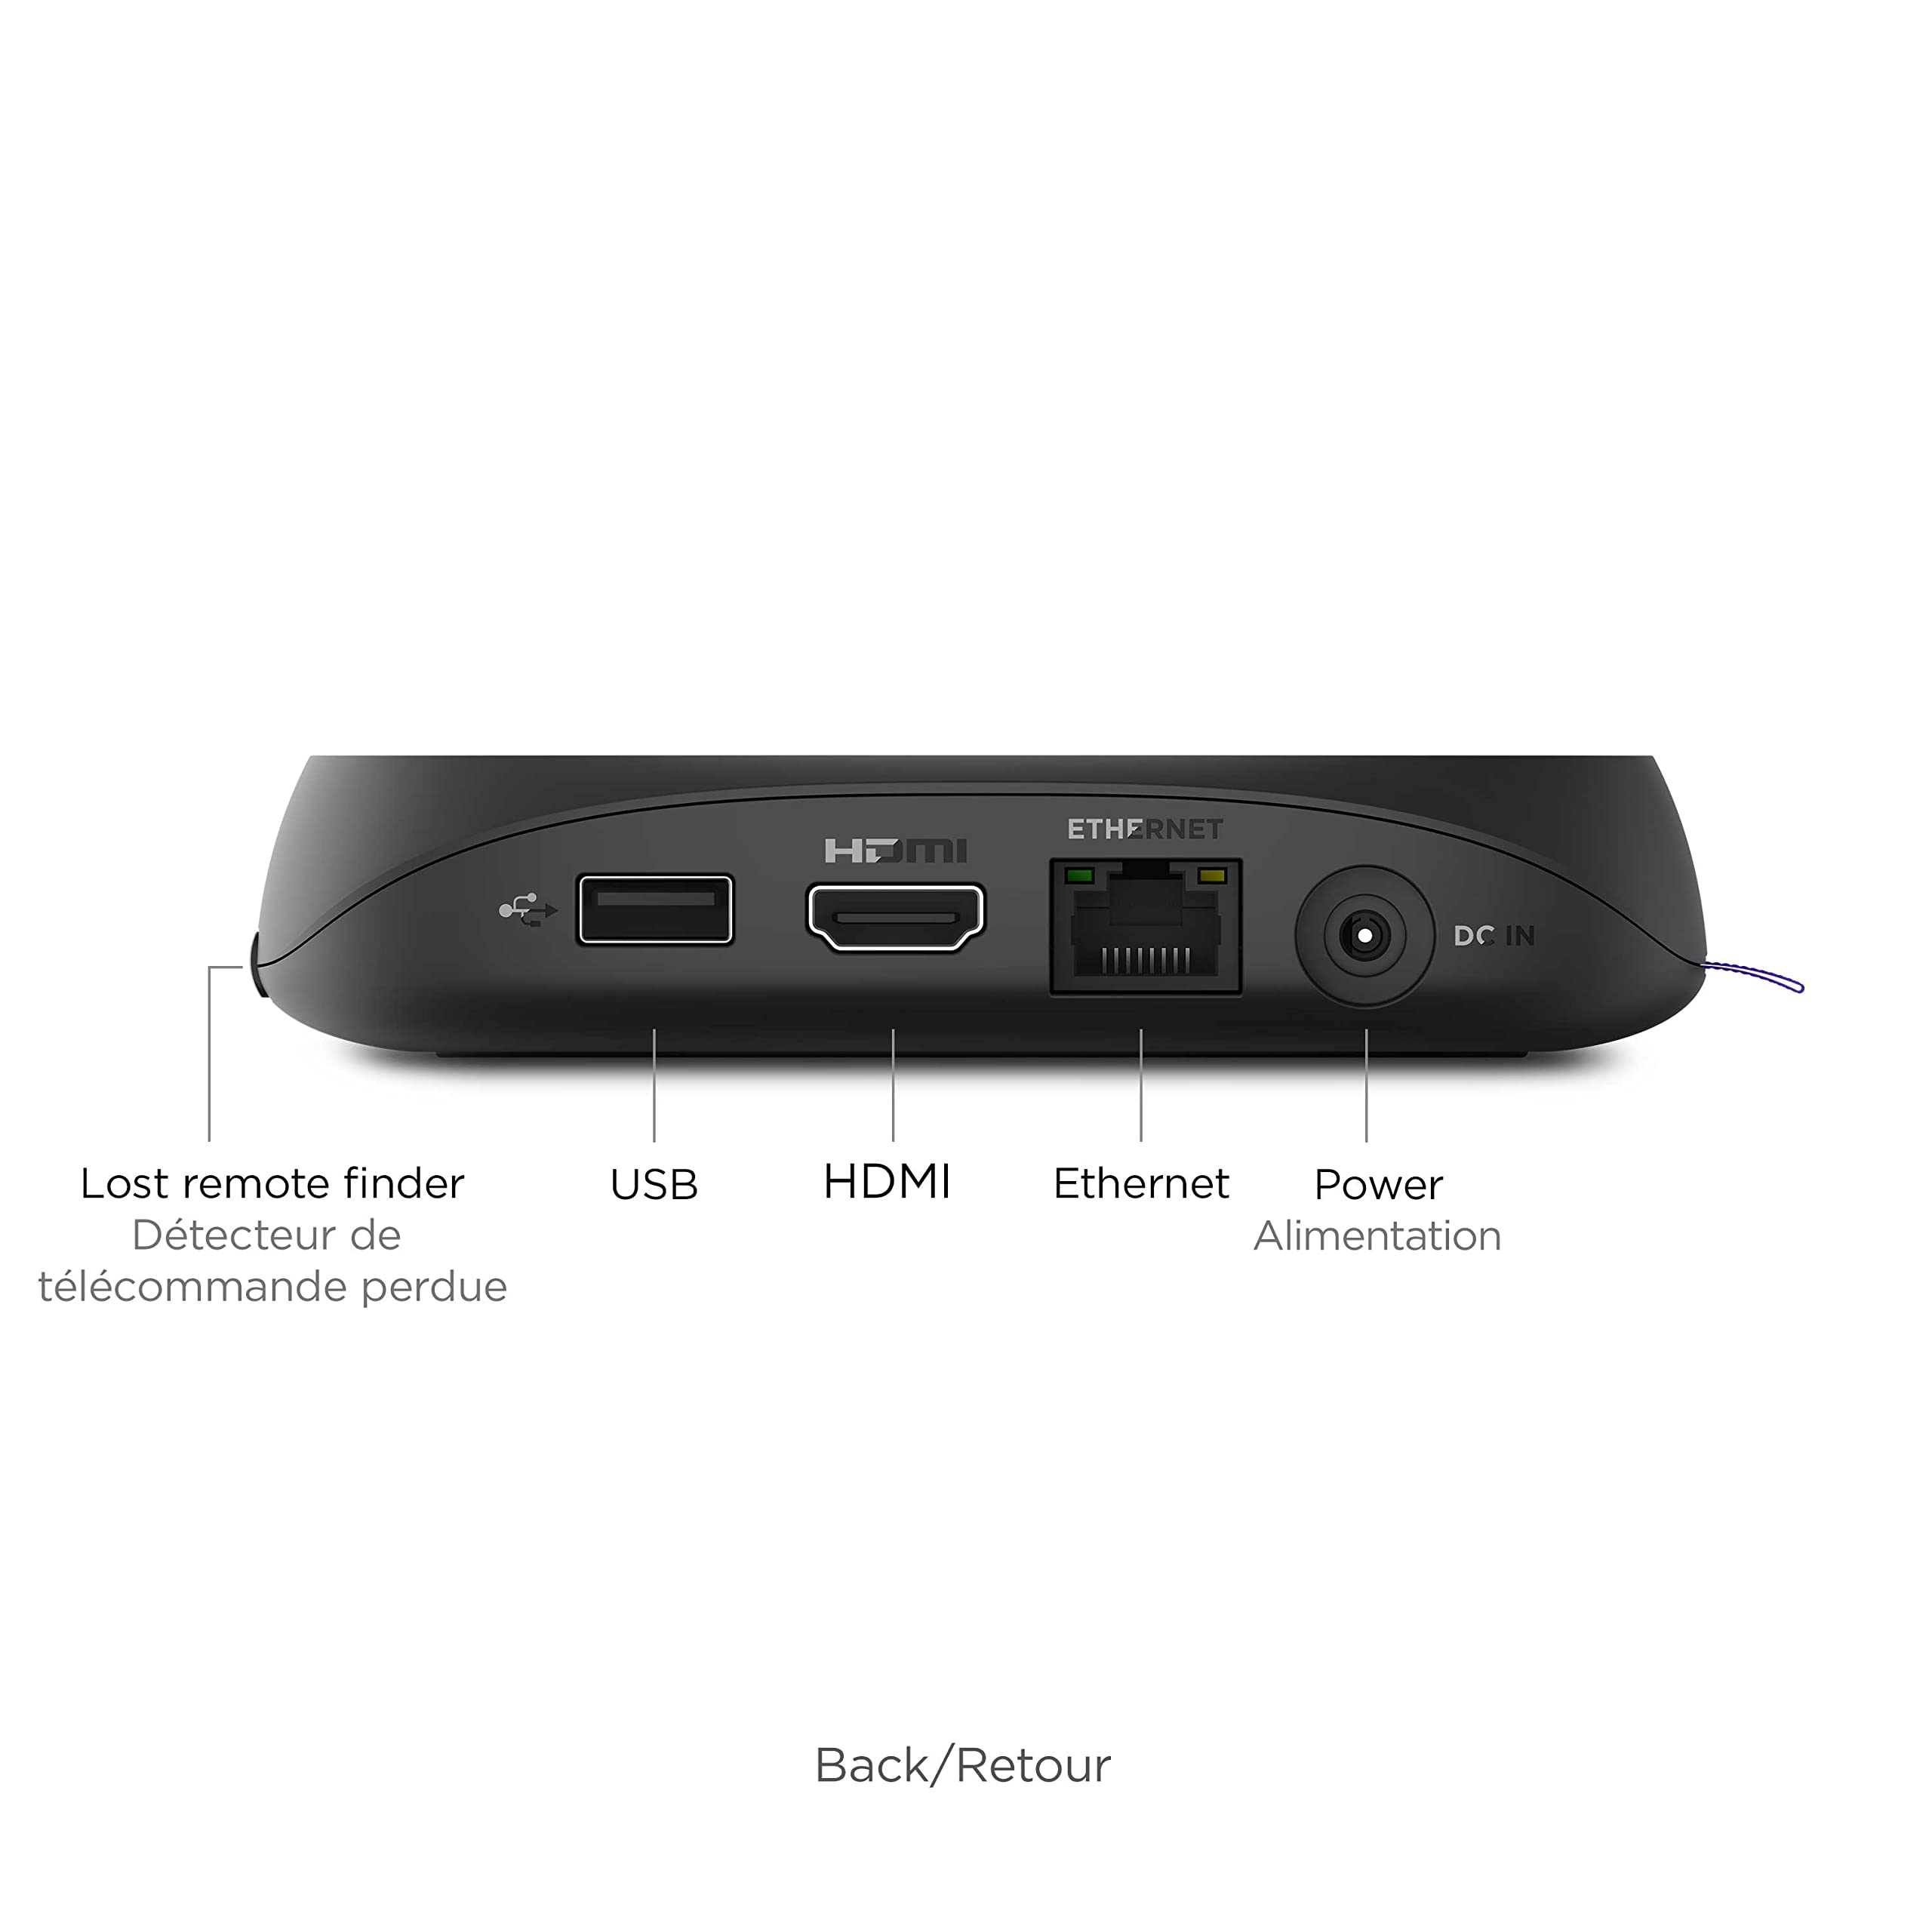 Roku Ultra LT (4K/HDR/HD) Streaming Player with Enhanced Voice Remote, Ethernet W/Premium 6FT 4K Ready HDMI Cable & 64GB MicroSD for Faster Channel Loading (US Version)